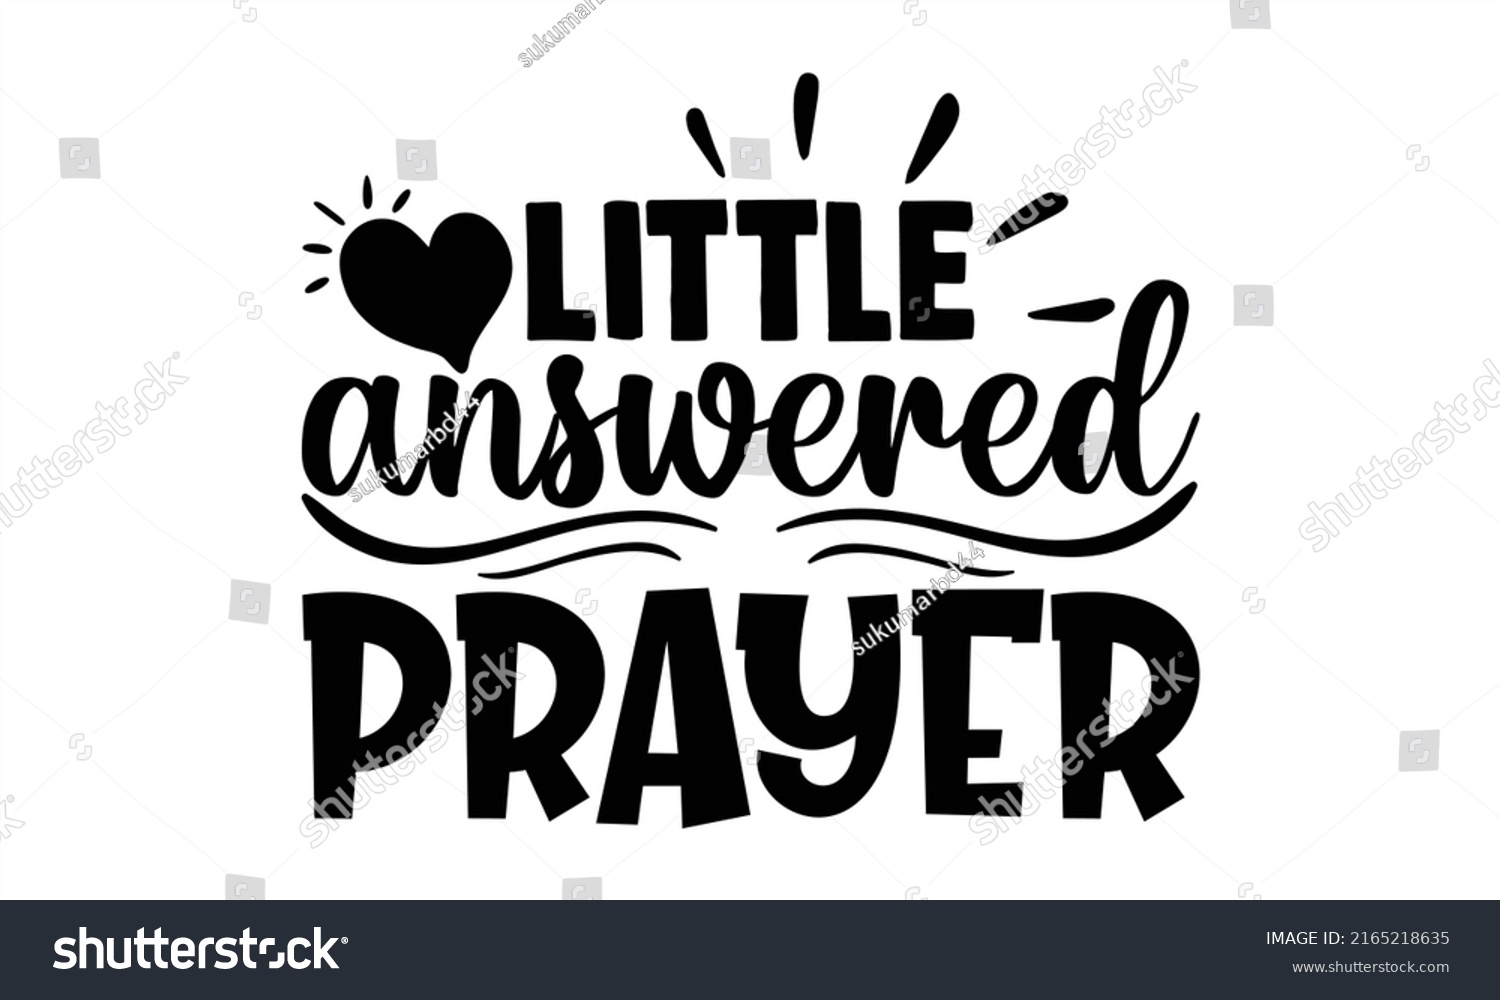 SVG of Little answered prayer - Cute Baby t shirts design, Hand drawn lettering phrase, Calligraphy t shirt design, Isolated on white background, svg Files for Cutting Cricut and Silhouette, EPS 10, card, fl svg